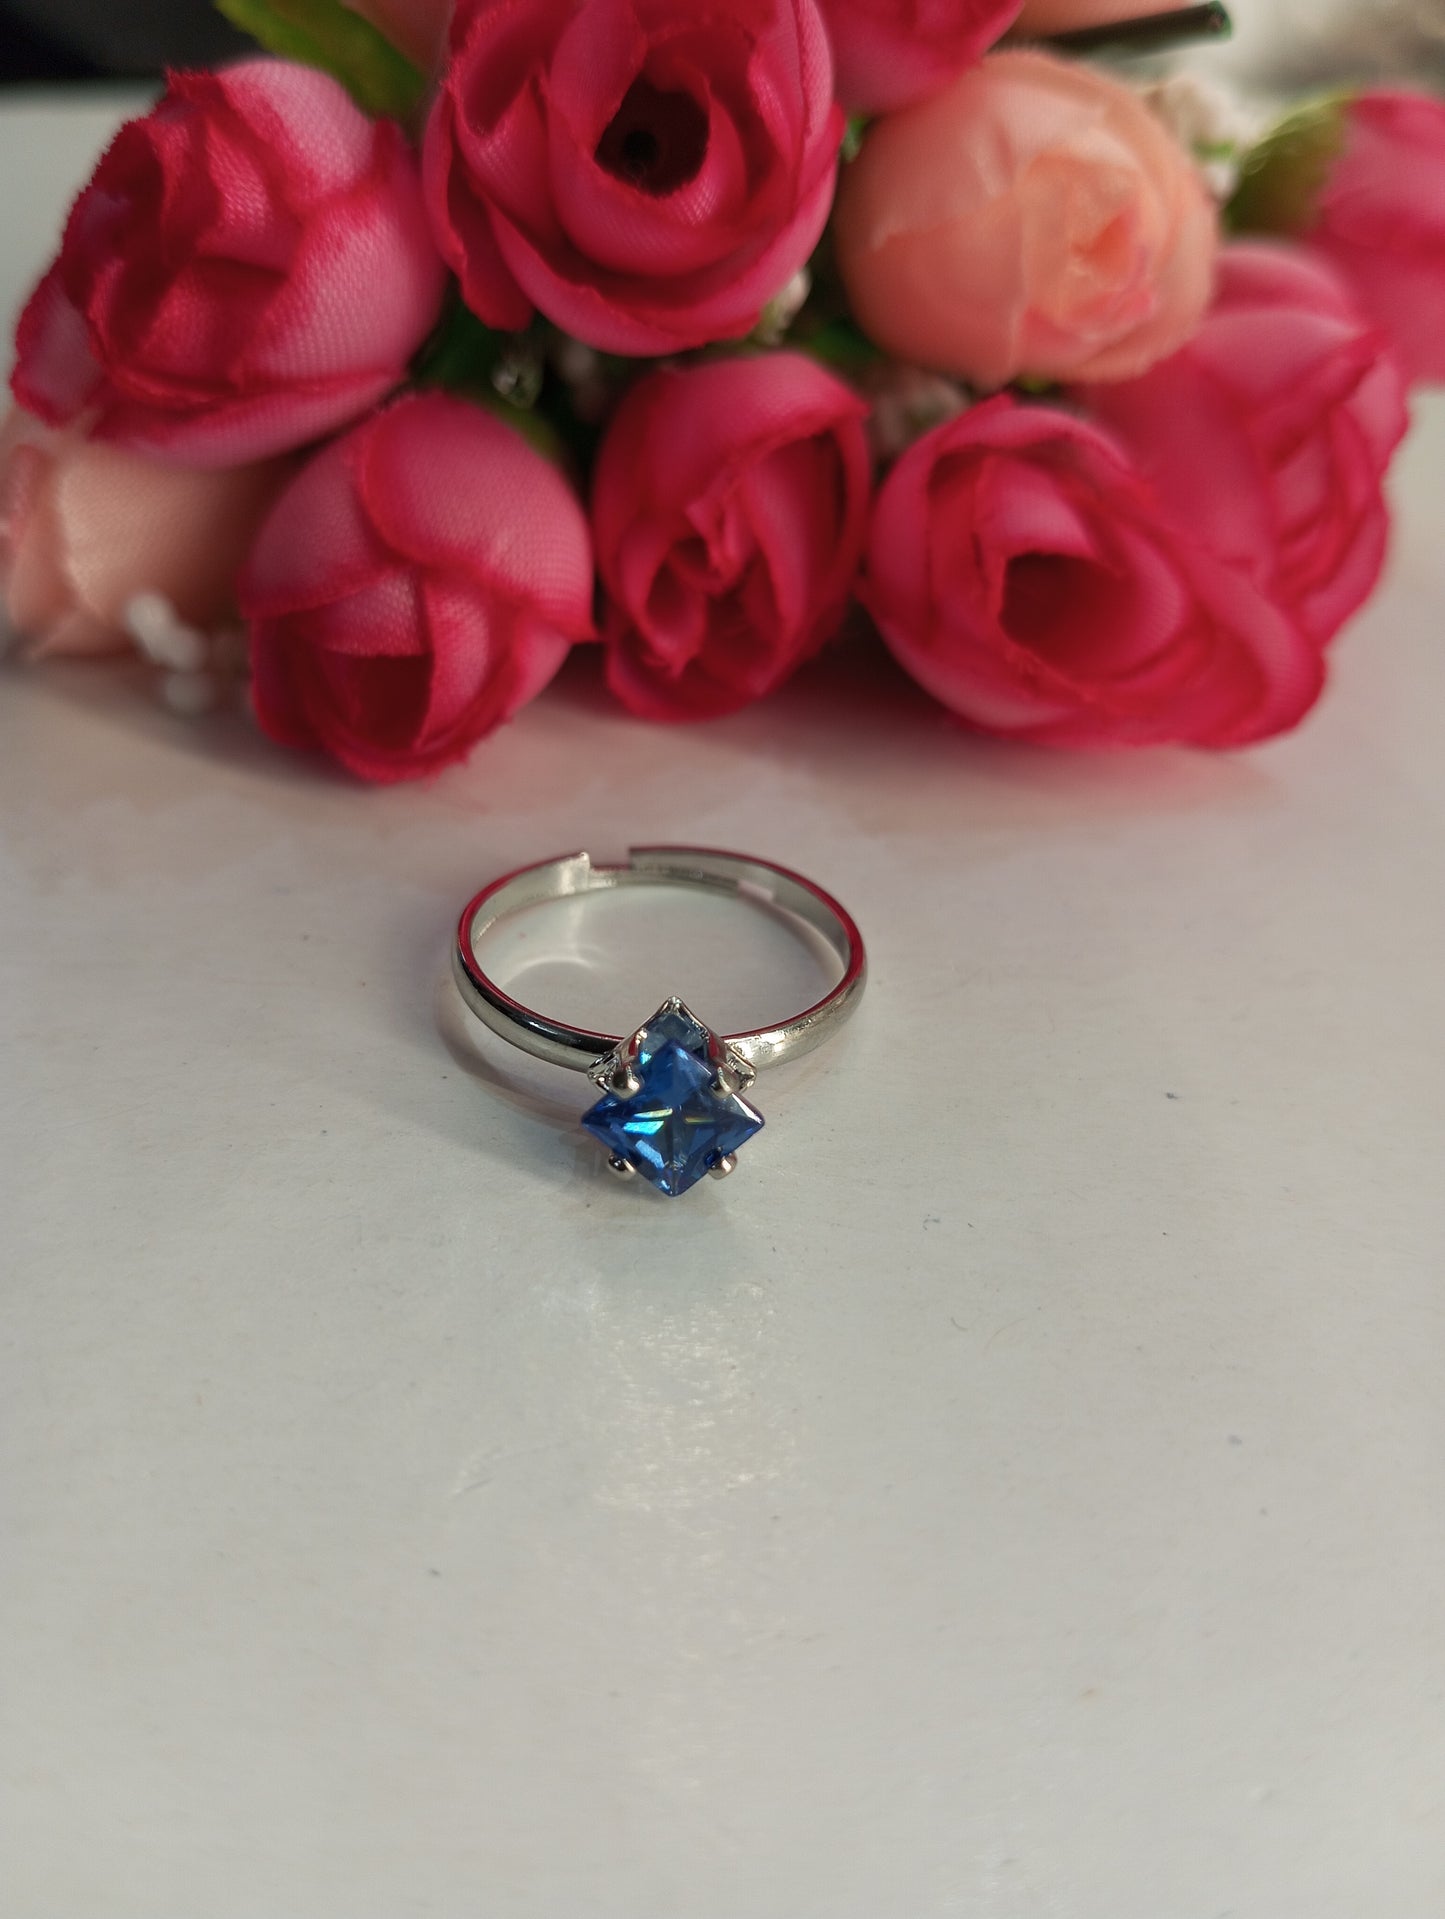 Square Shape Stone Ring- Blue and Silver Color